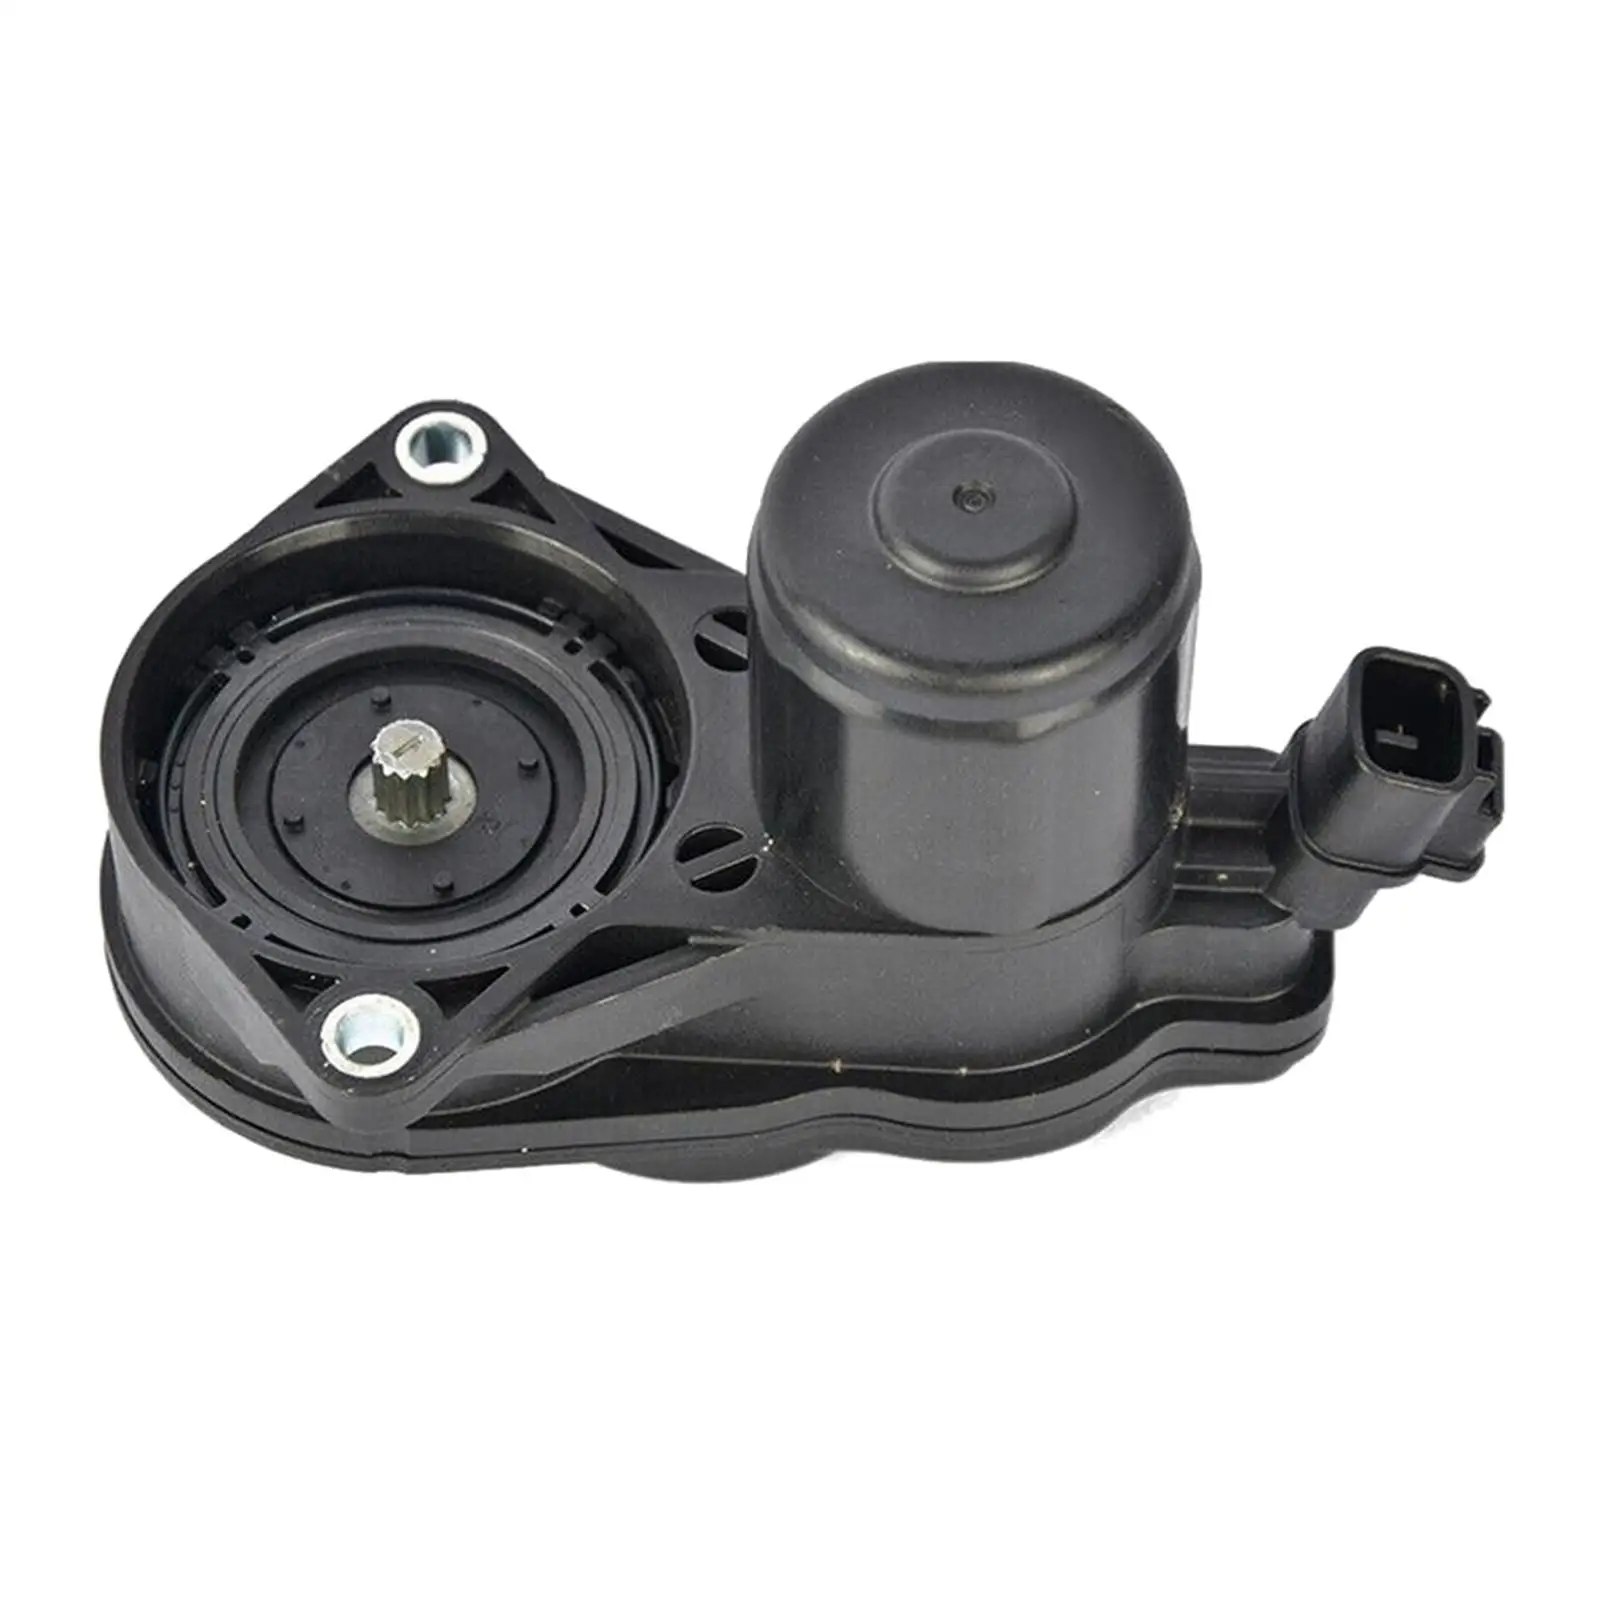 Parking Brake Actuator Replaces Car Accessories 46310-33010 for Toyota for c-hr for camry for highlander